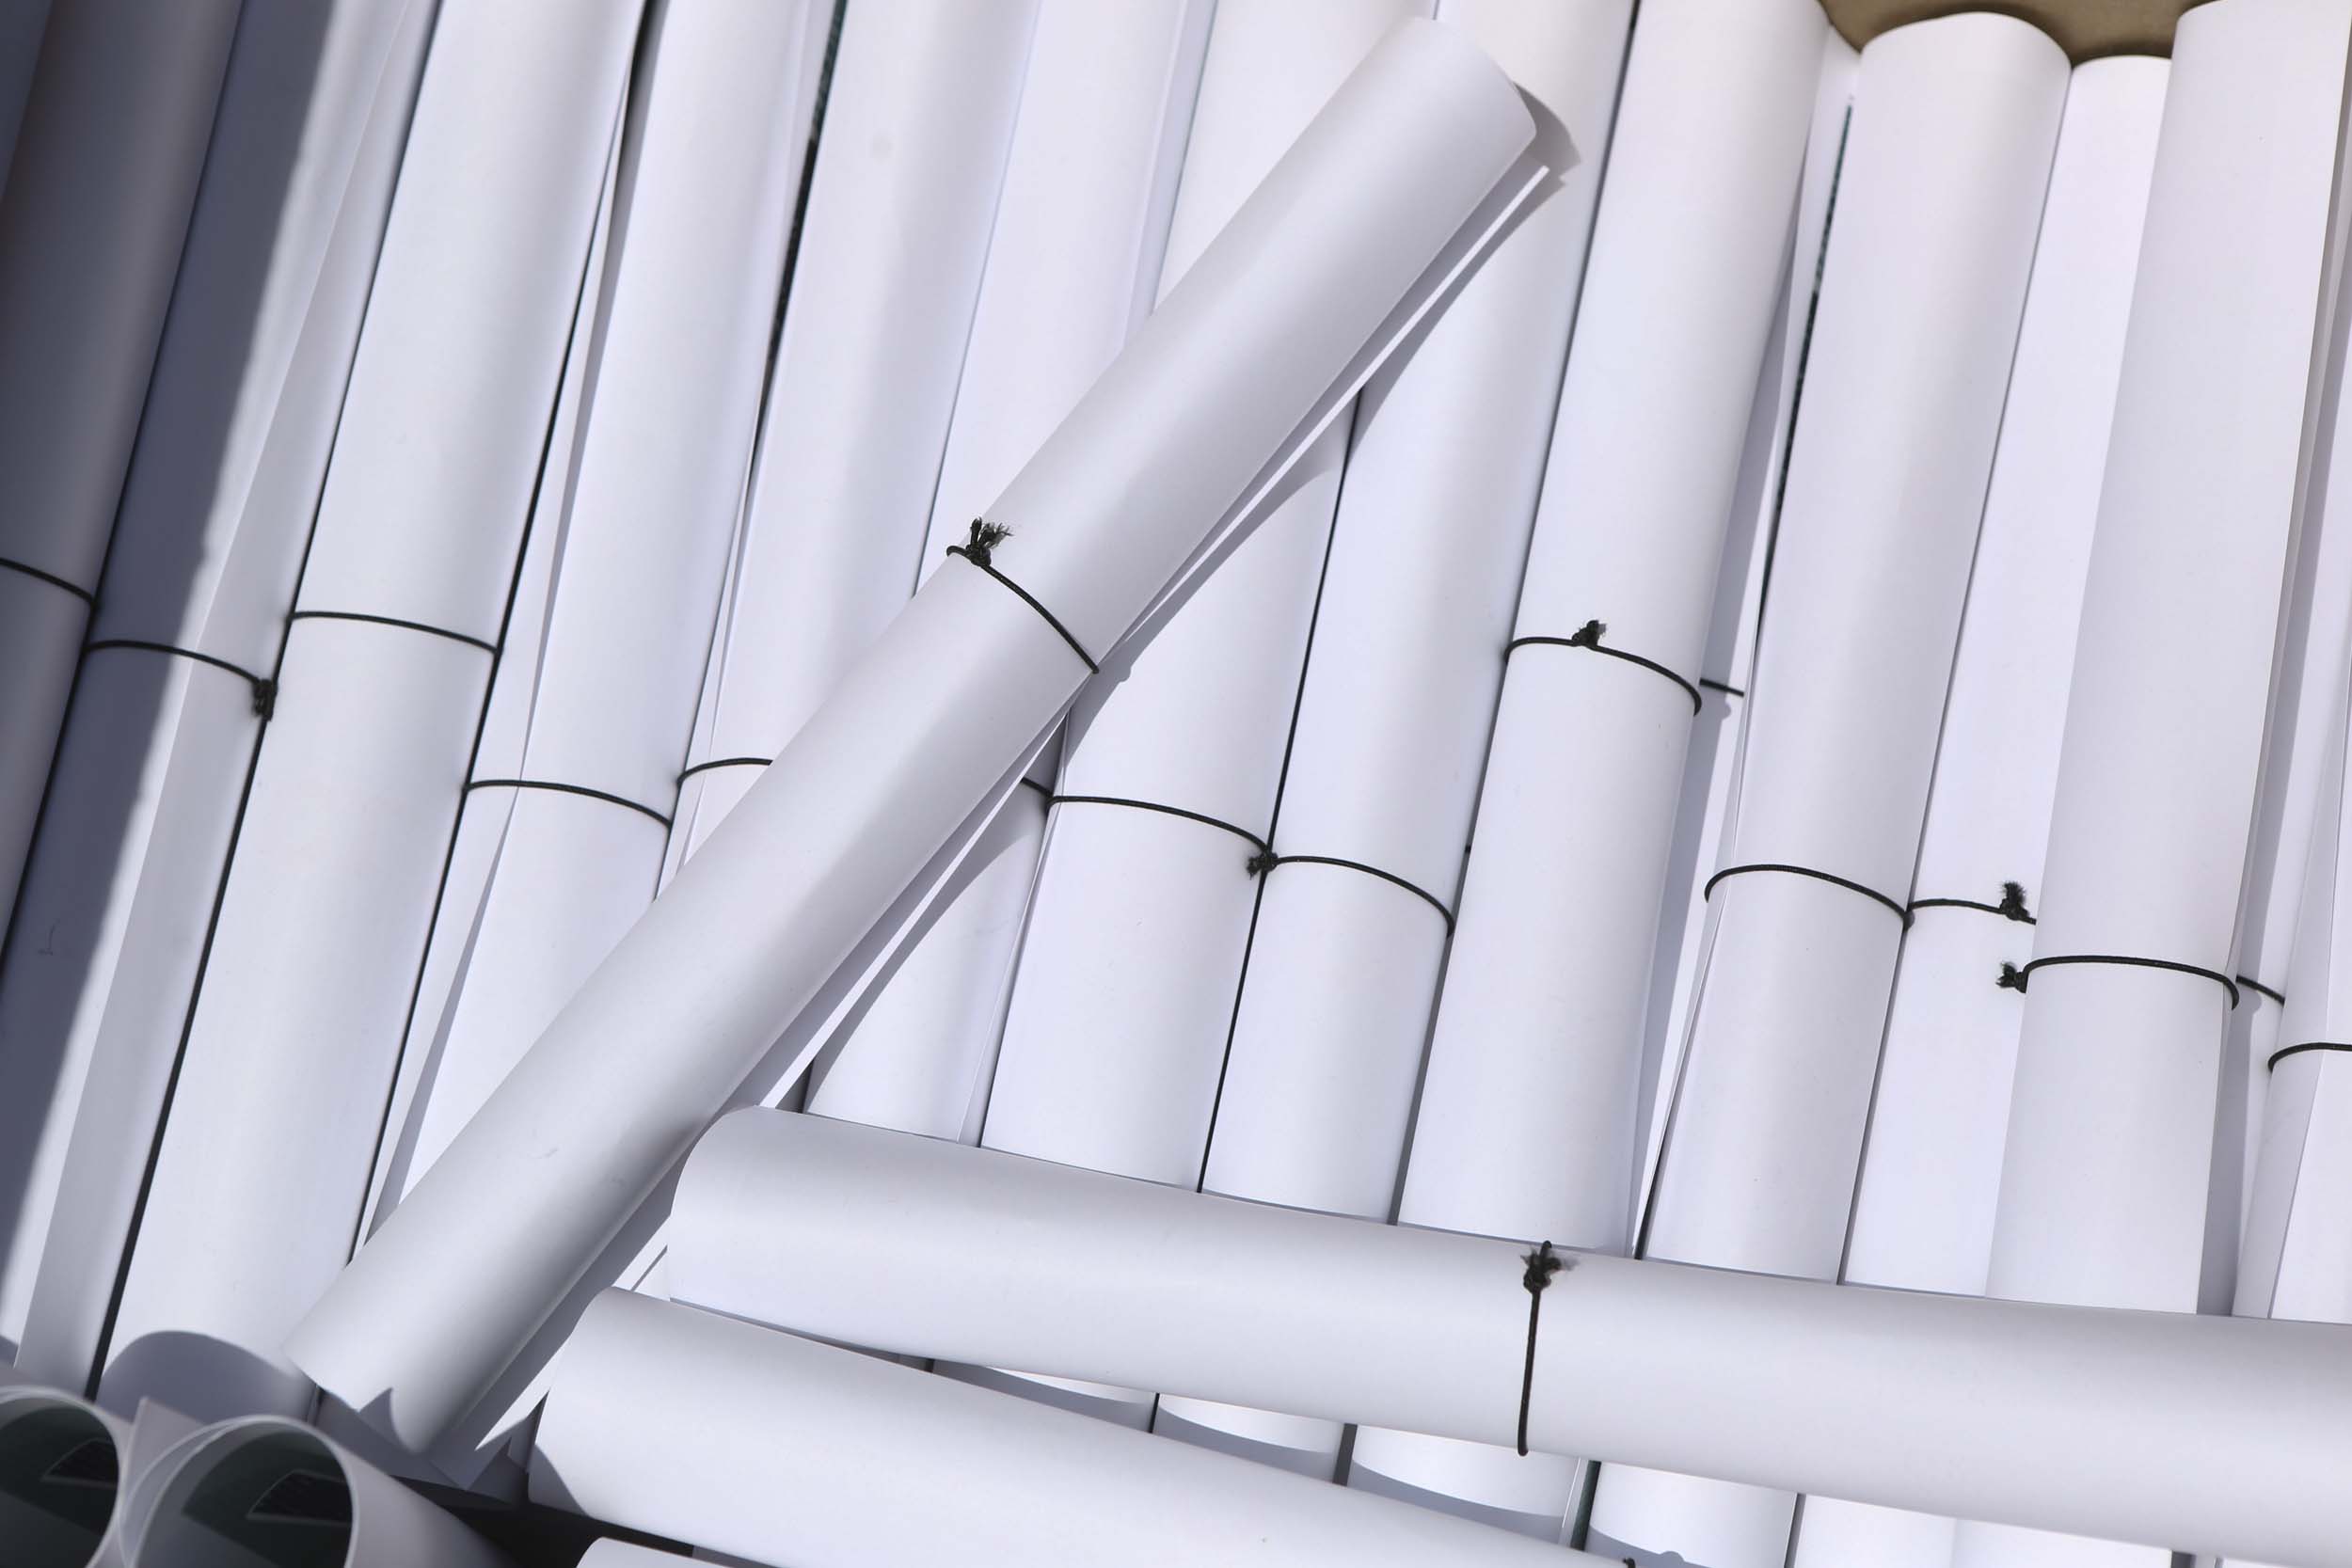 Rolled Diplomas in a stack with small black elastic bands keeping them each rolled up